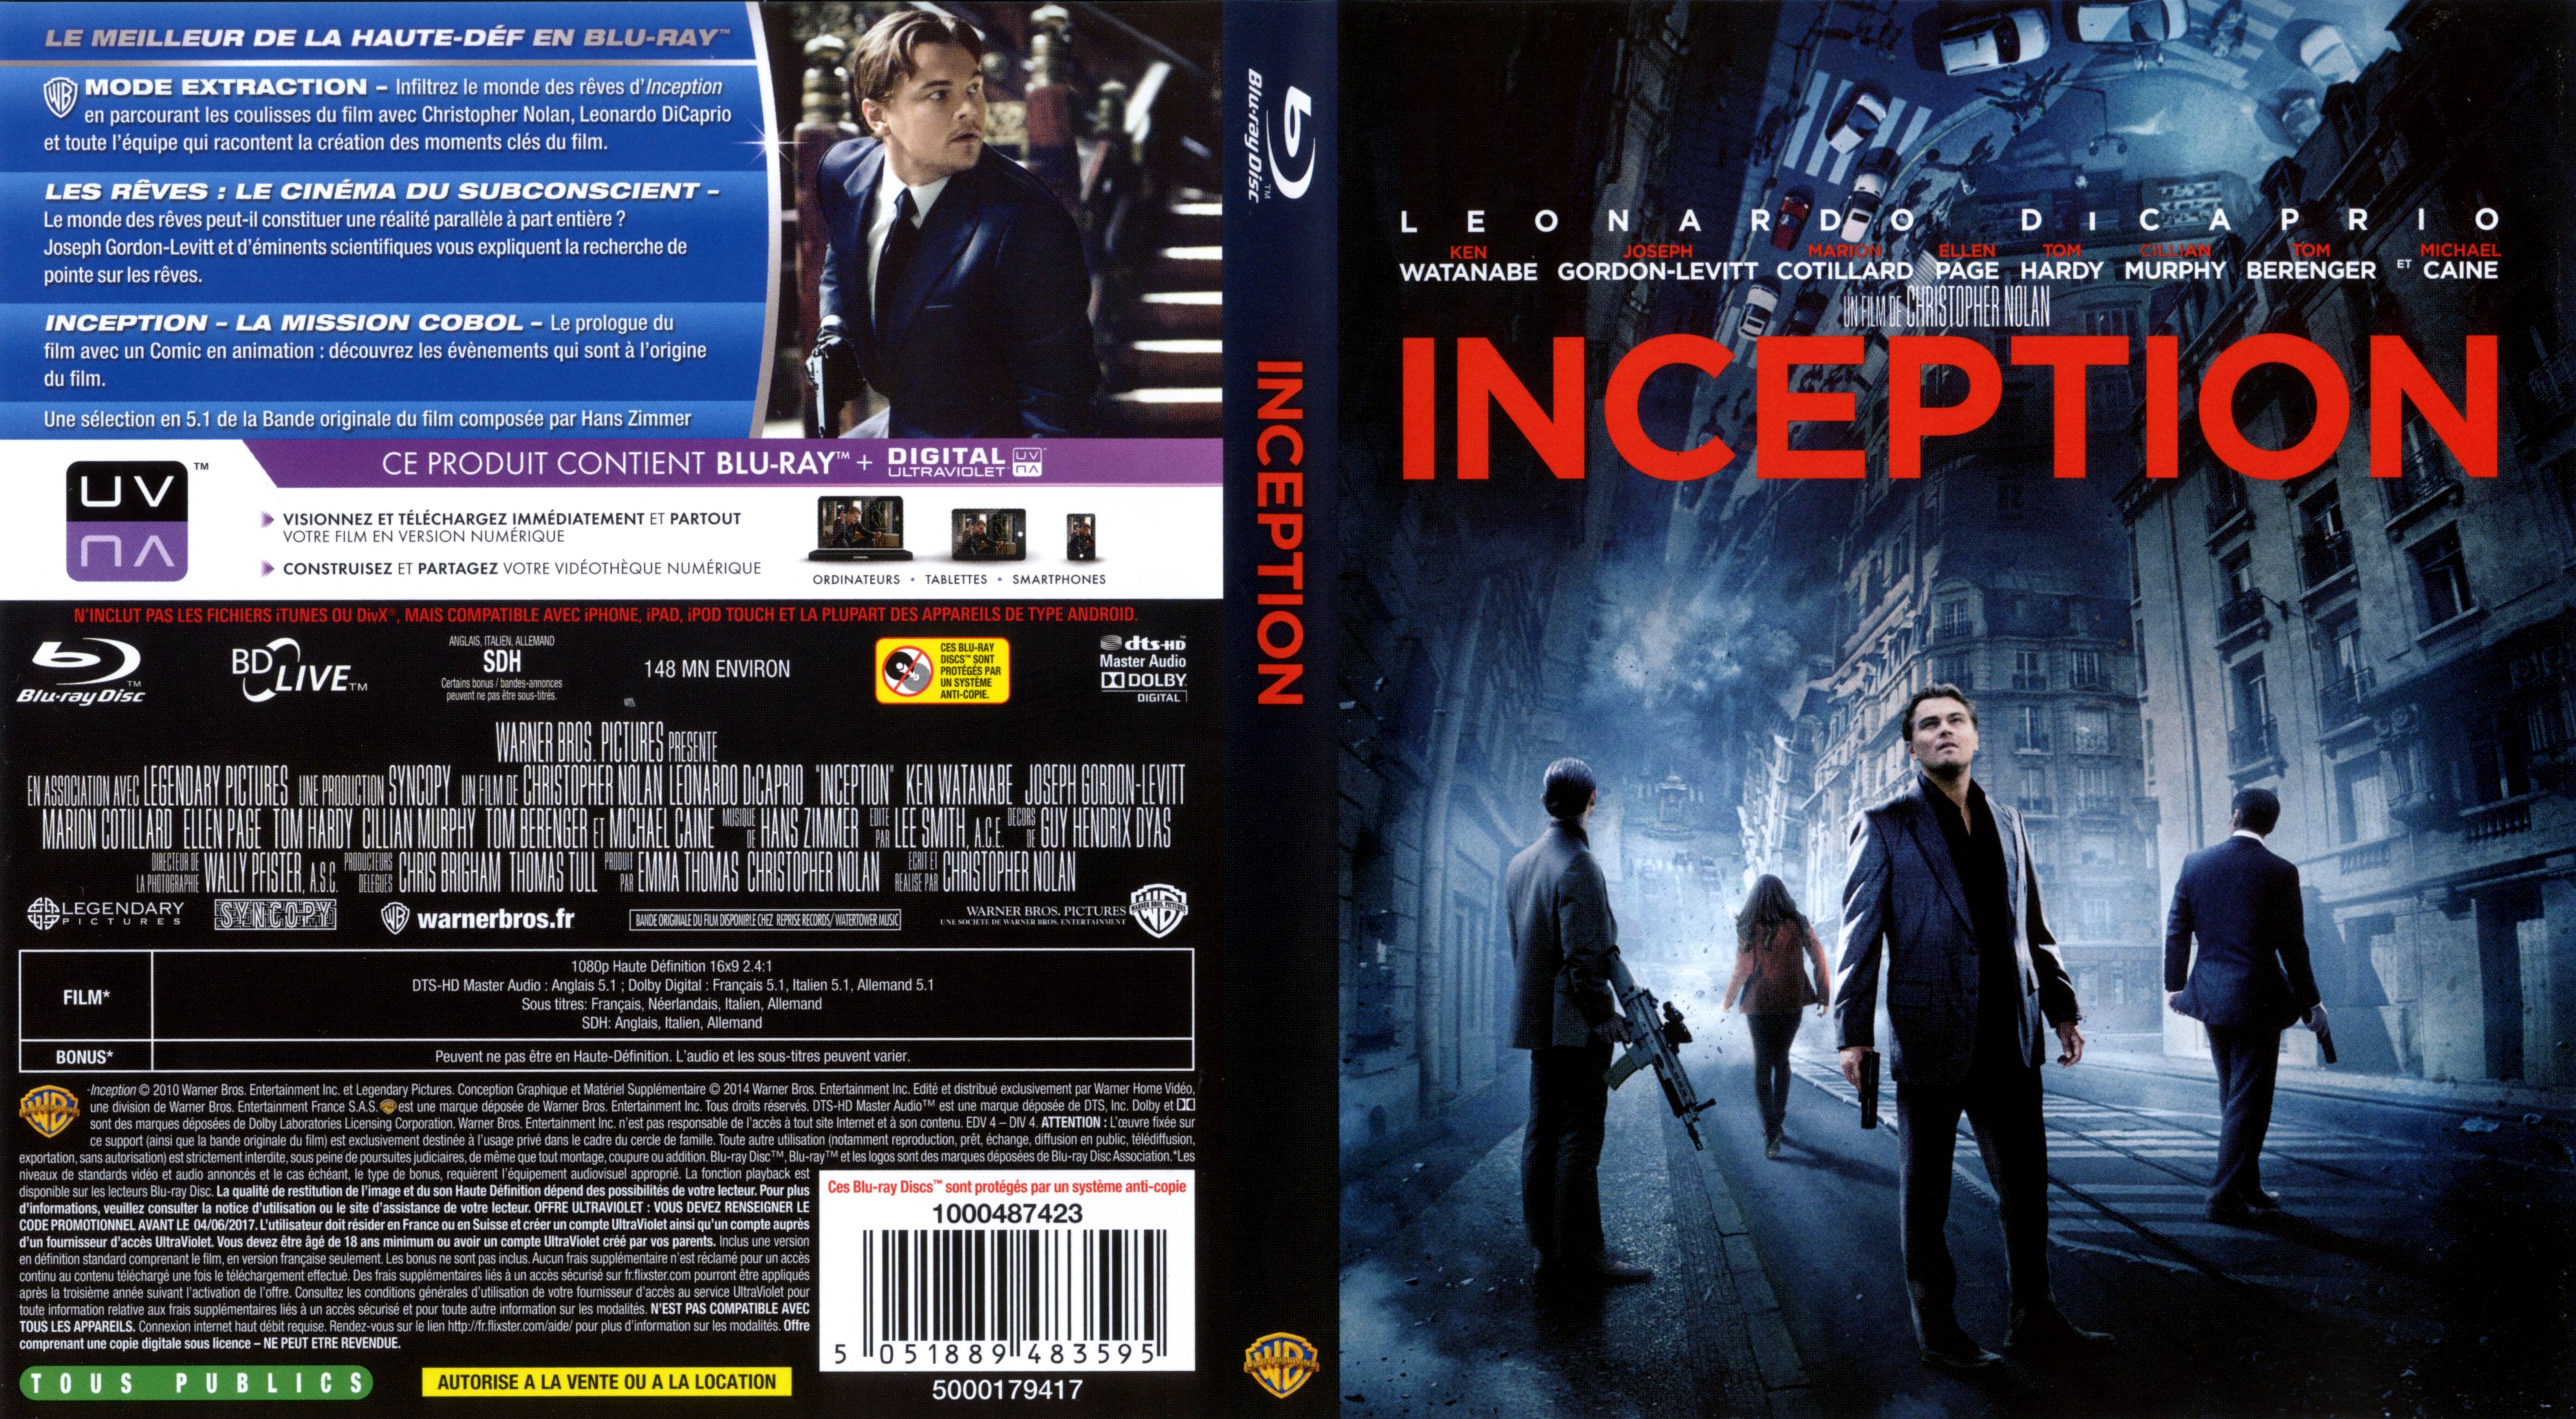 Jaquette DVD Inception (BLU-RAY) v4